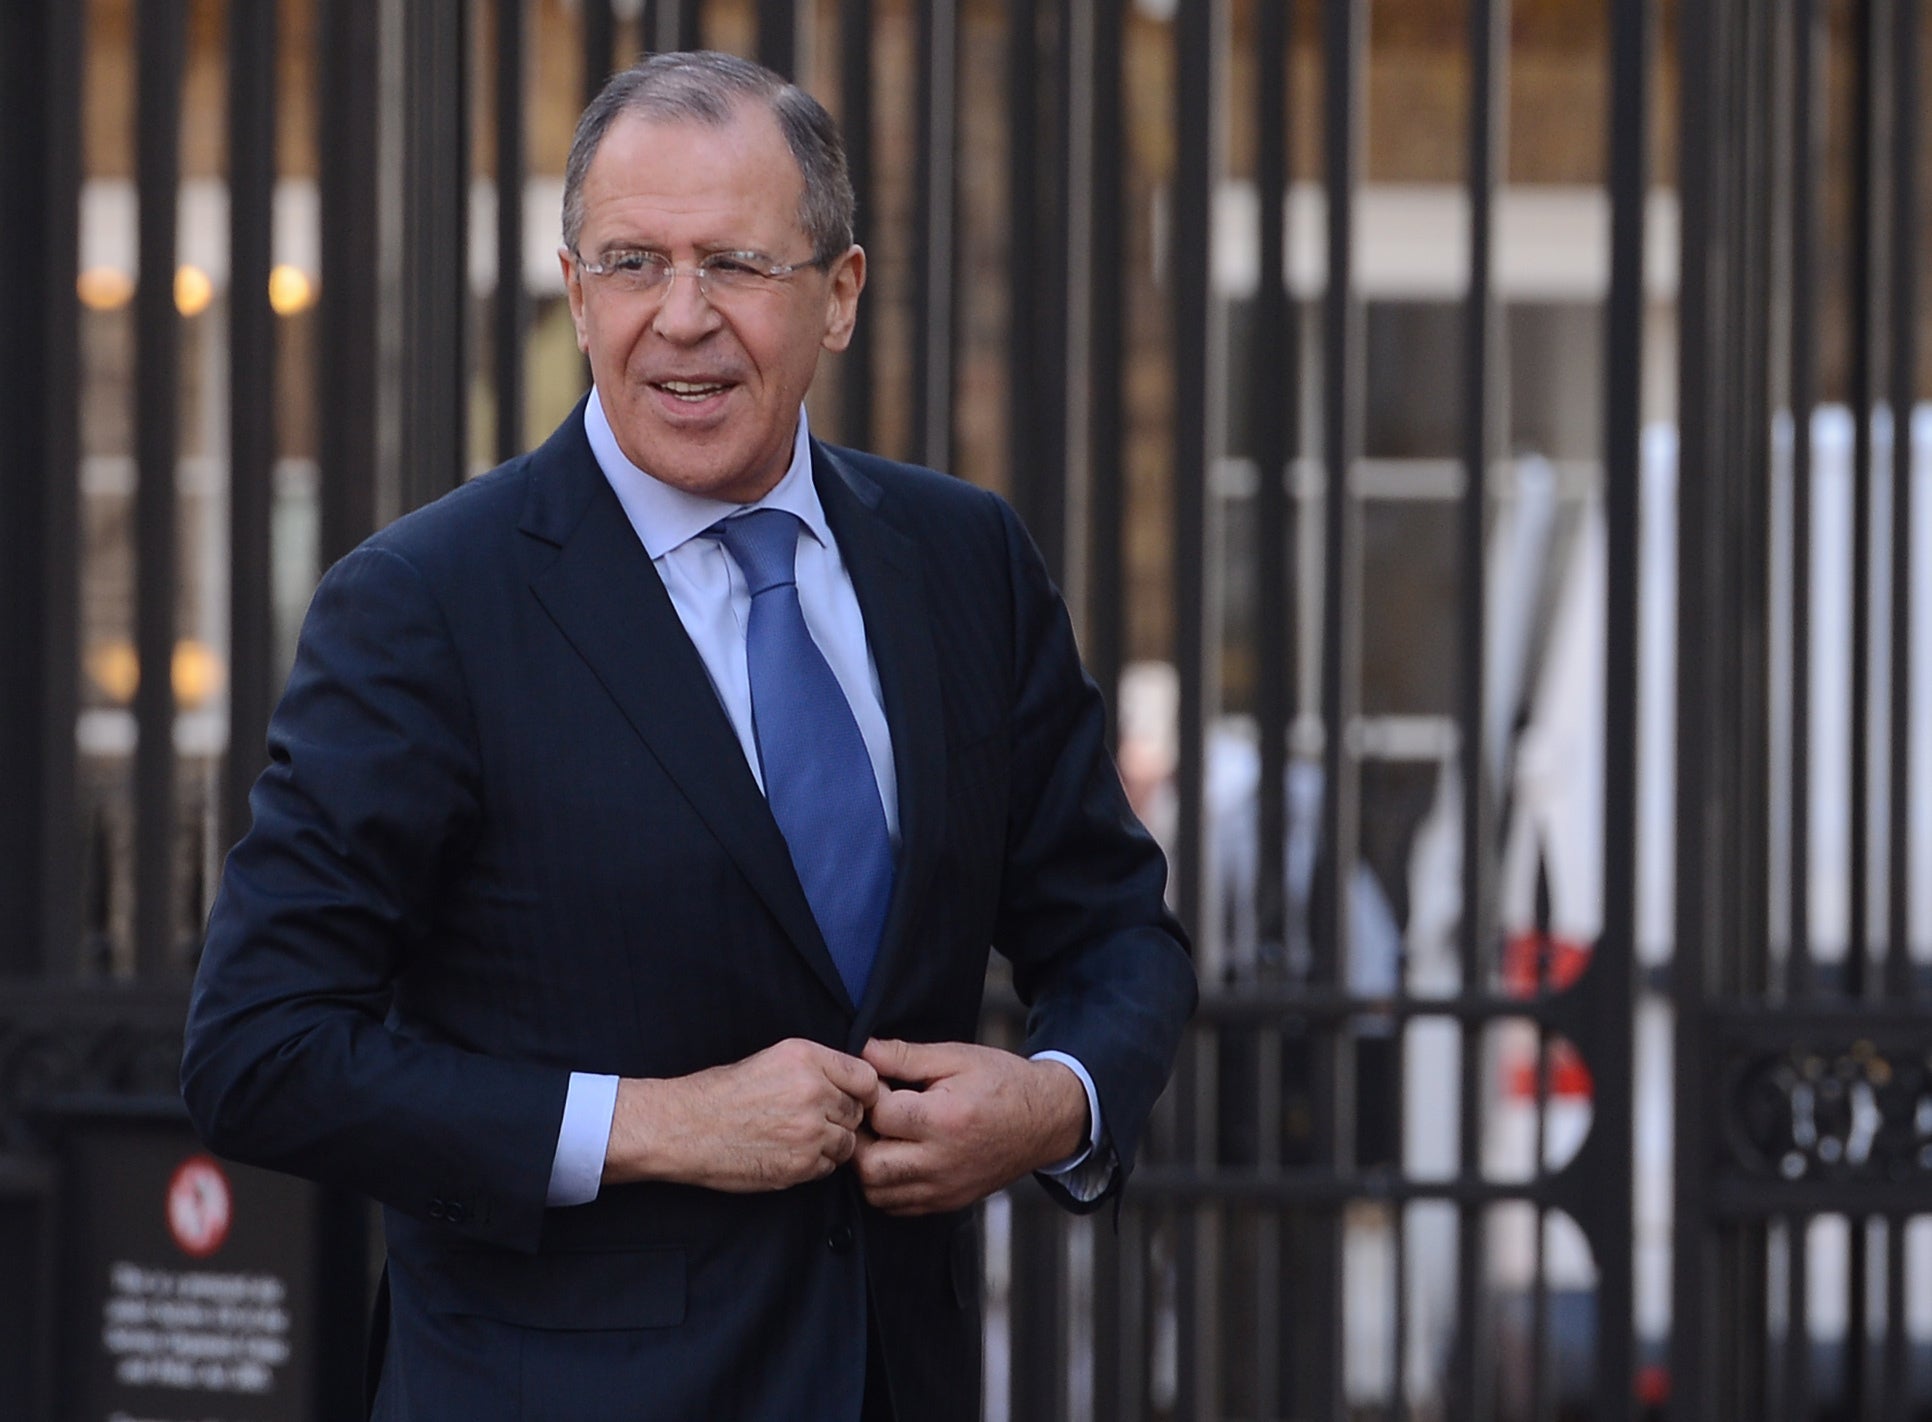 Sergei Lavrov said the UN is being used to spread ‘fake news’ by the West